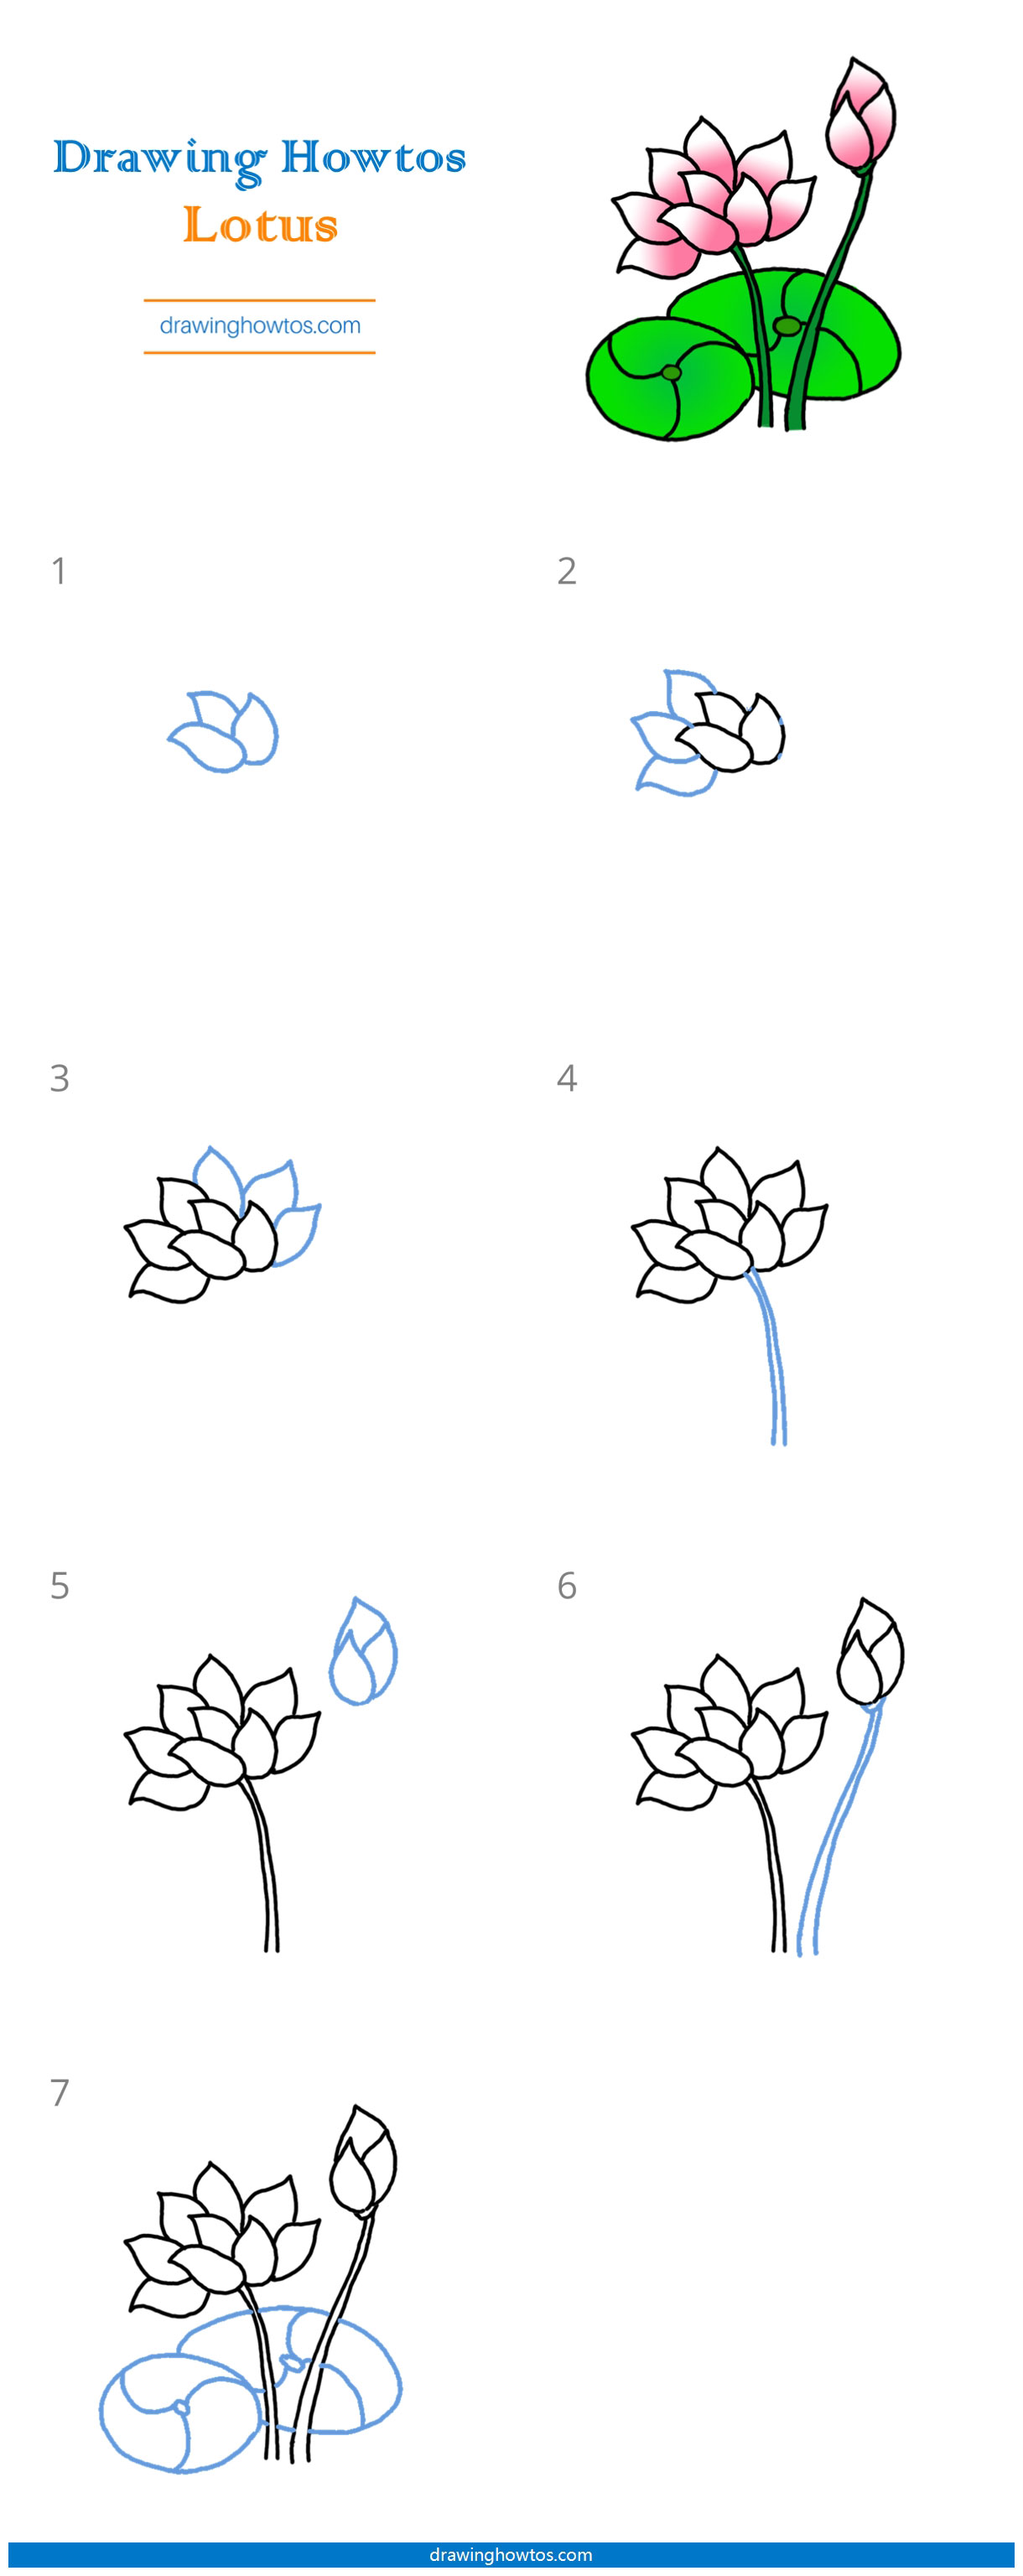 How to Draw a Lotus Step by Step